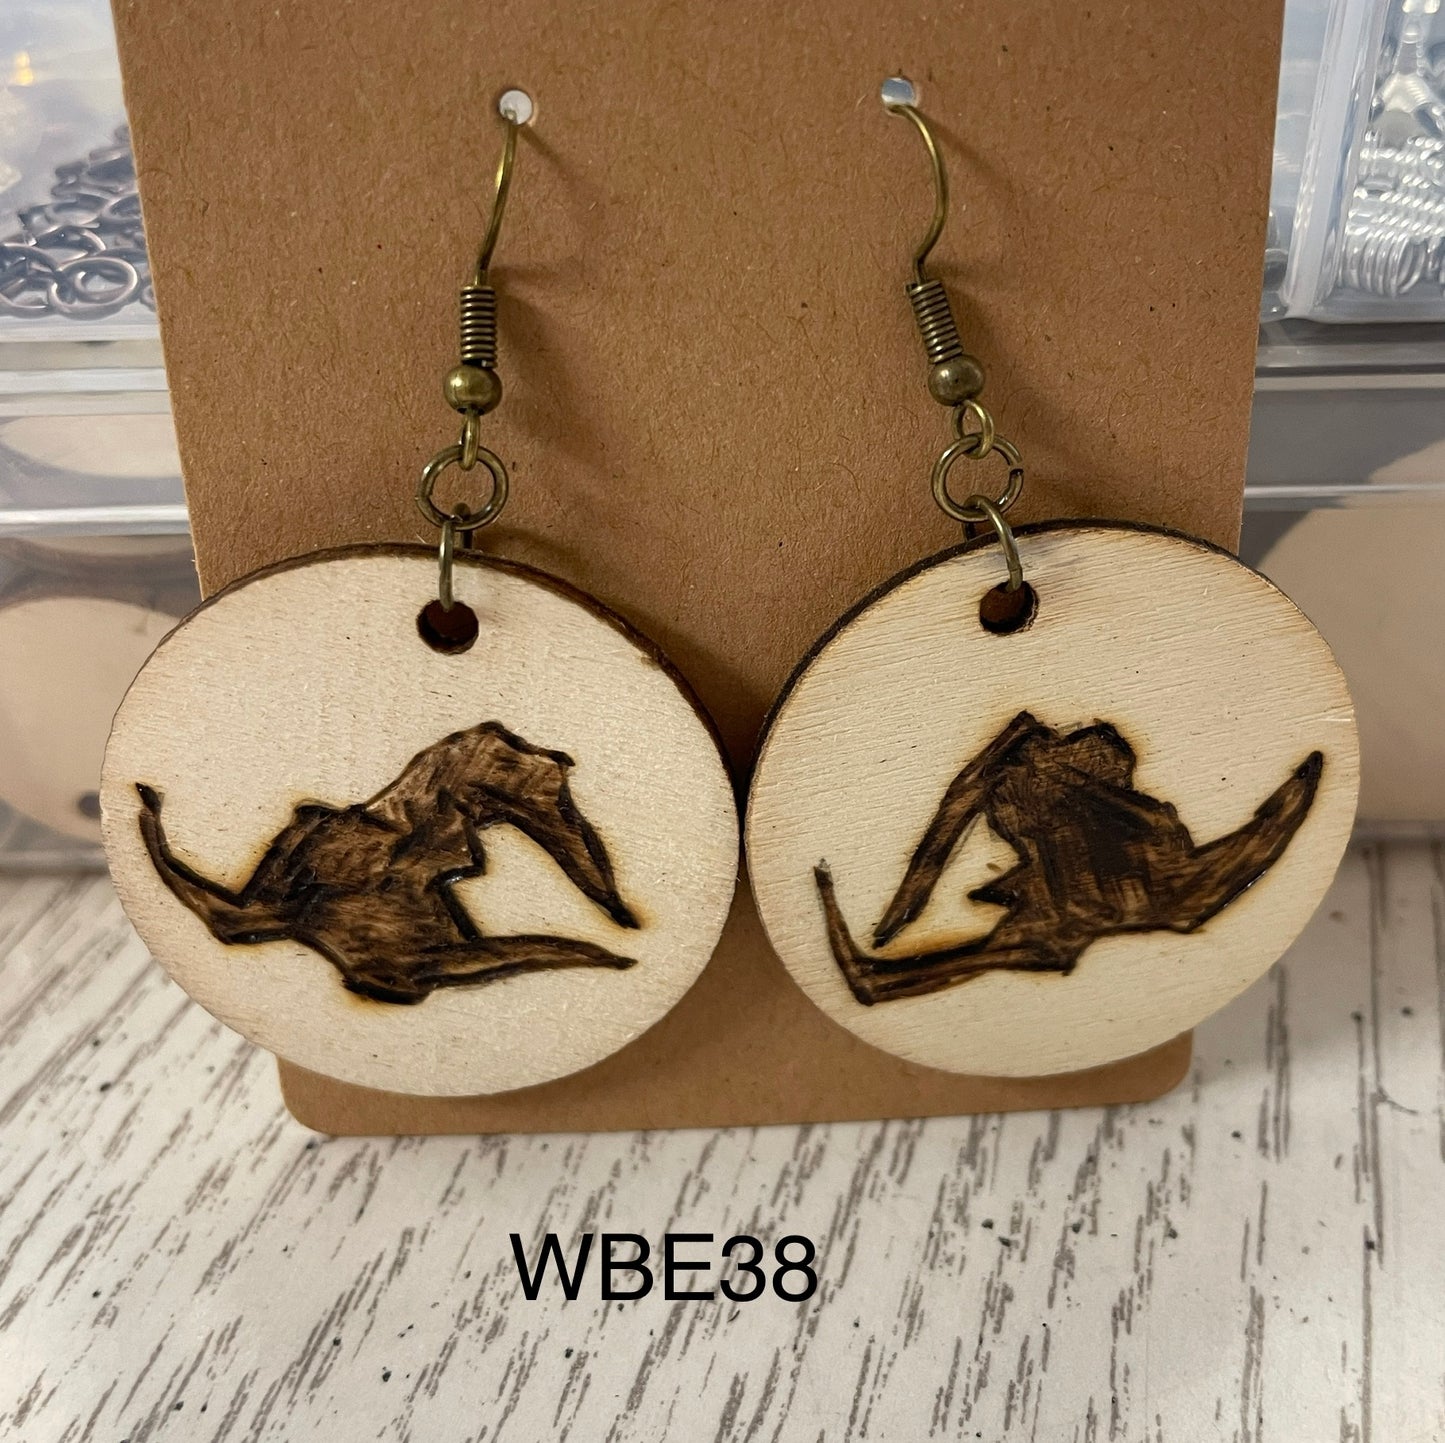 Wood burned witches hat earrings WBE38